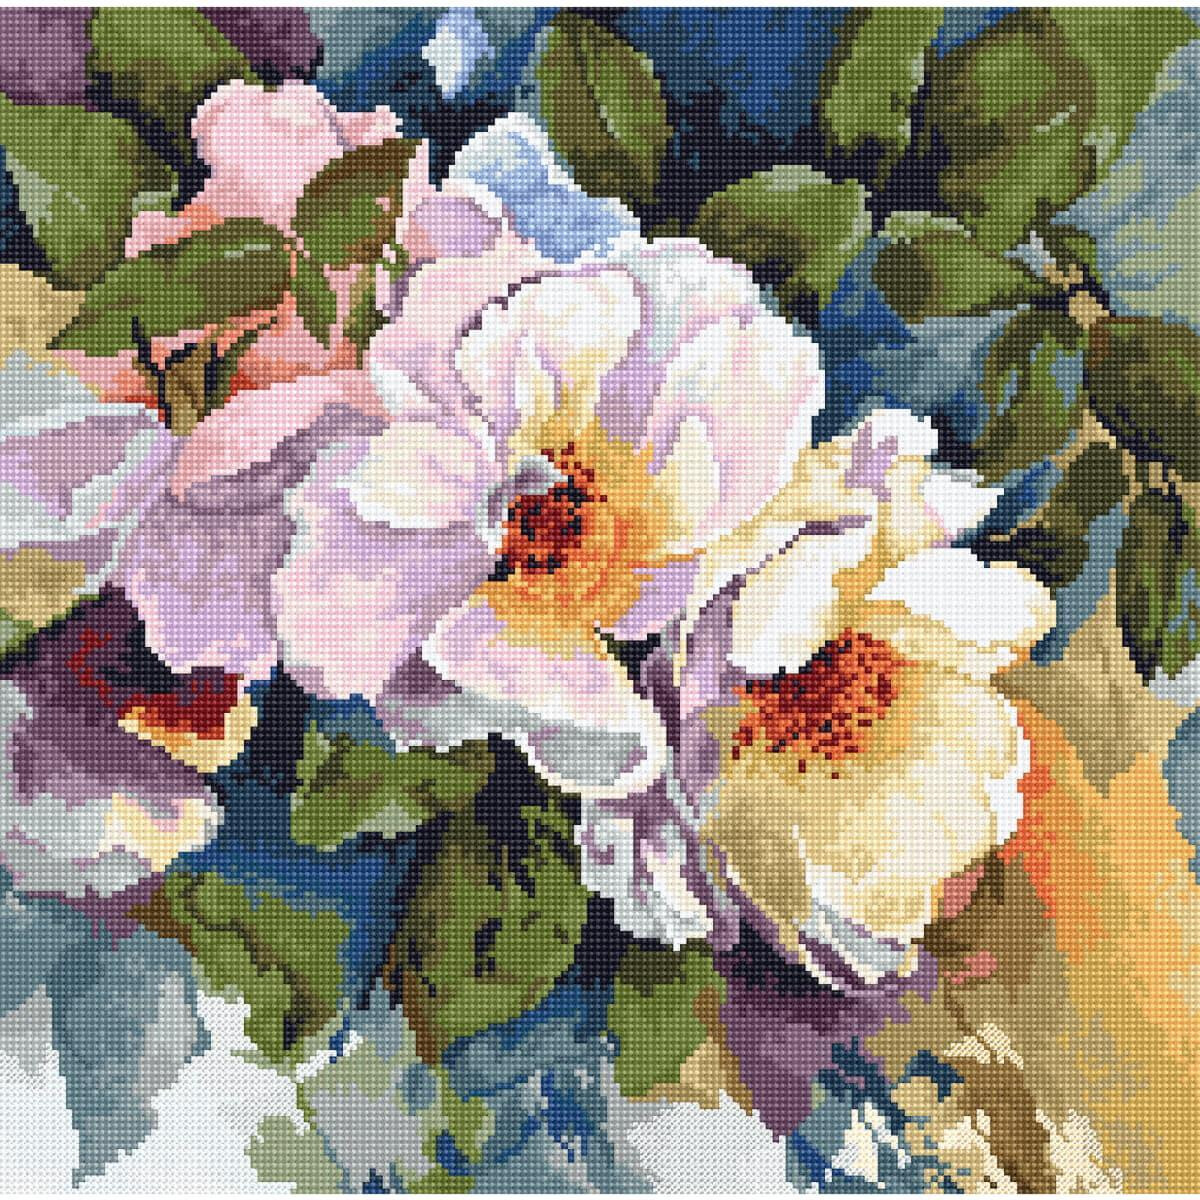 A vibrant floral painting reminiscent of an embroidery...